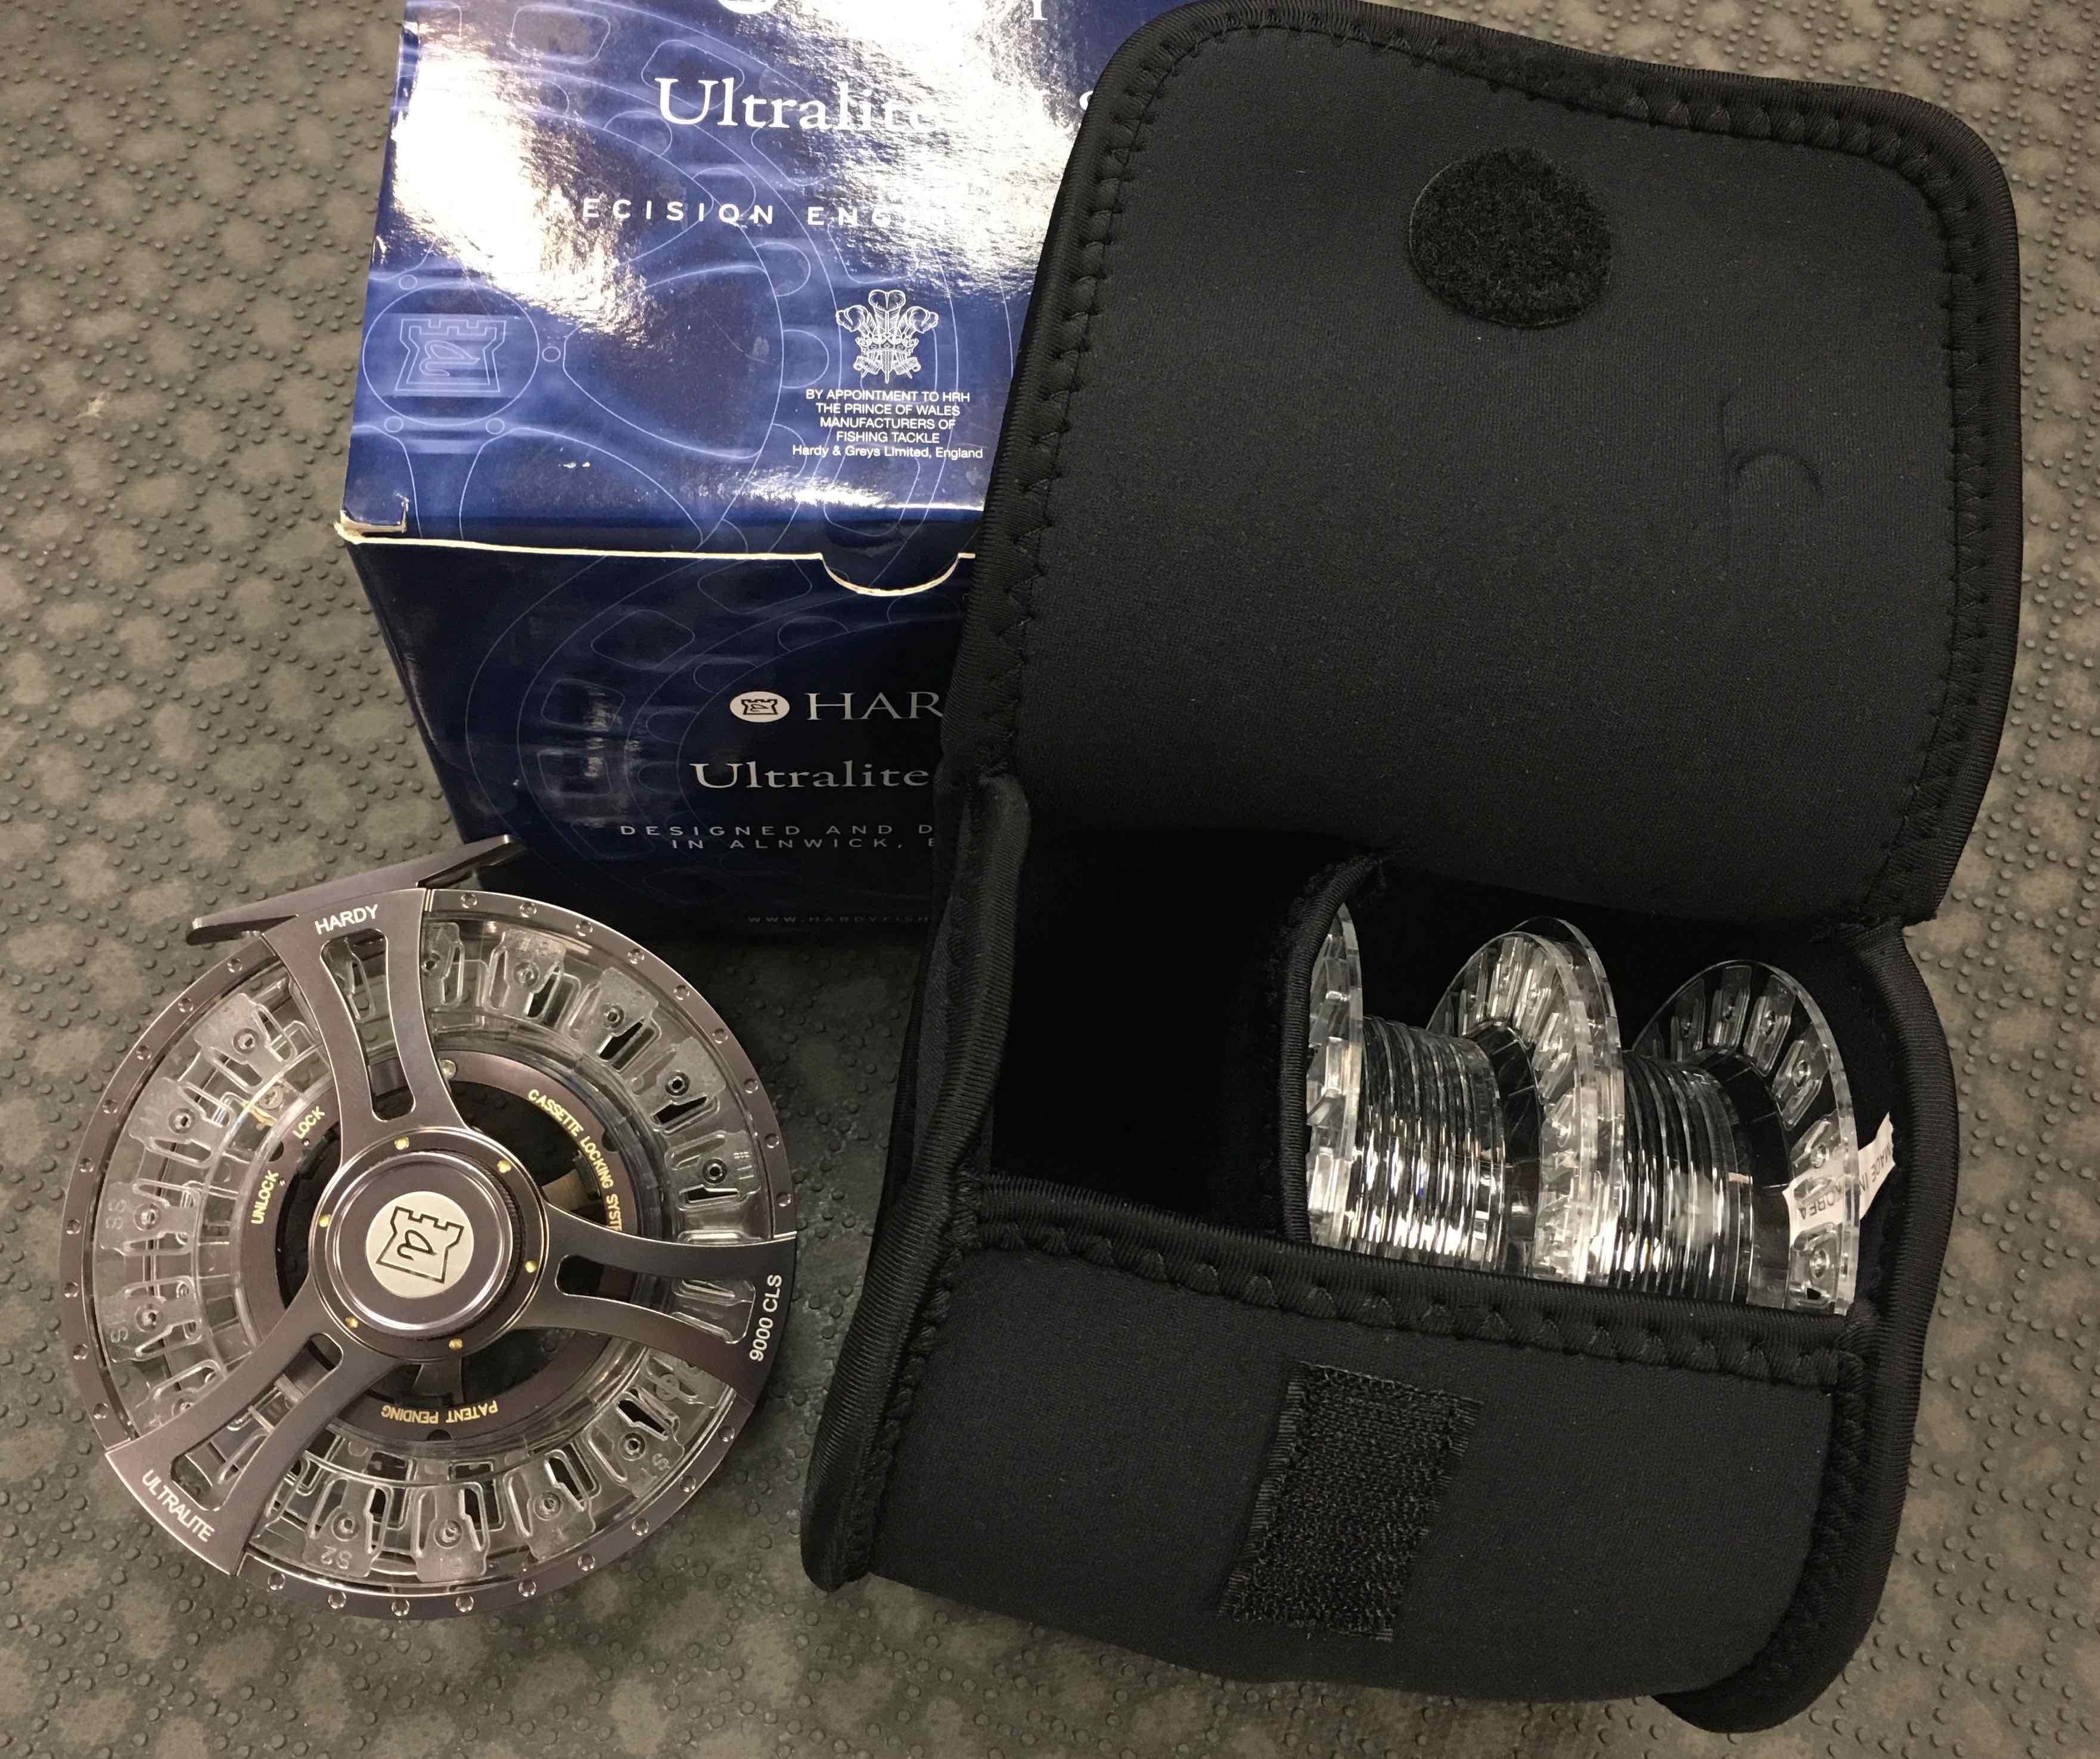 https://thefirstcast.ca/wp-content/uploads/2017/08/Hardy-9000-Ultralite-CLS-Cartridge-Style-Fly-Reel-with-two-Spare-Spools-AA.jpg